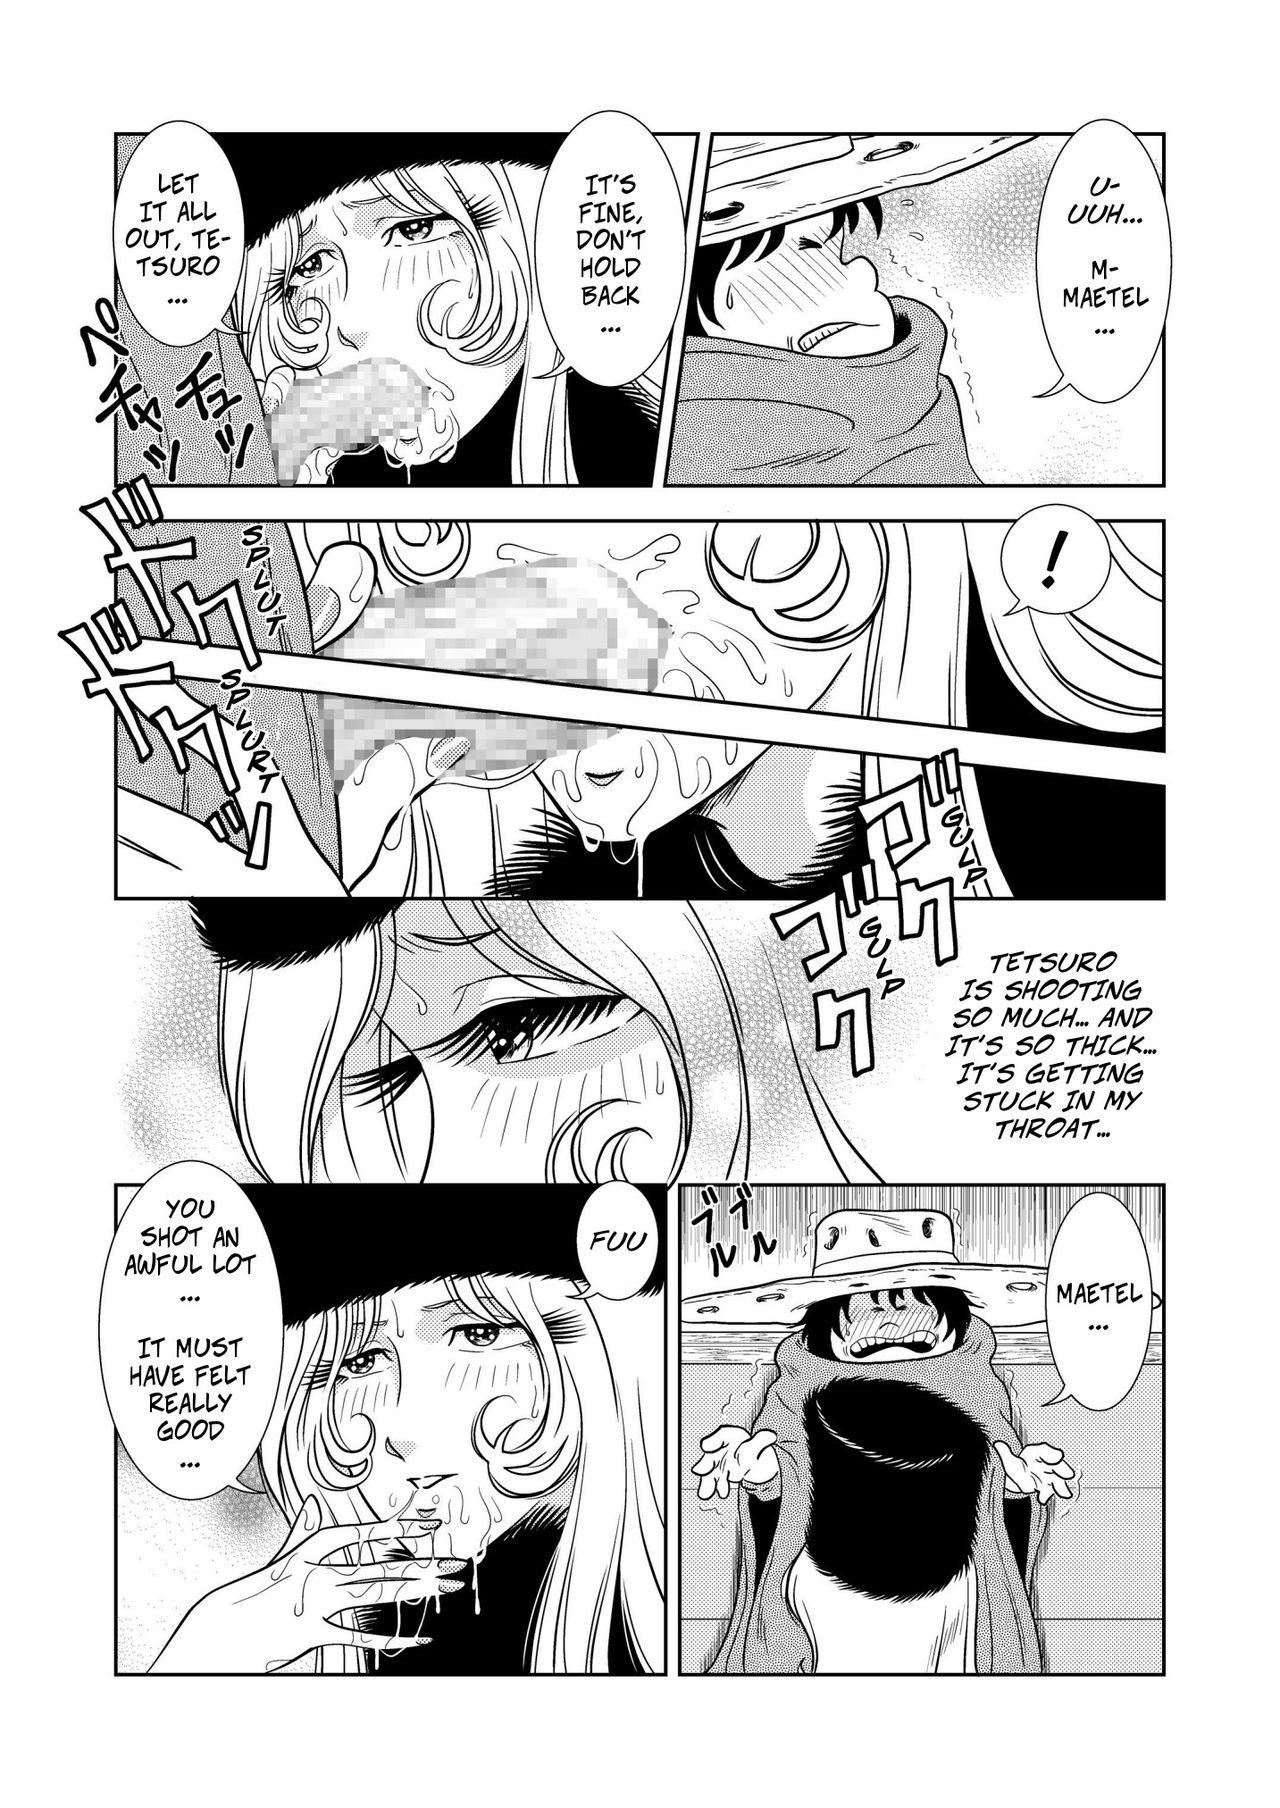 Teens Maetel Story 2 - Galaxy express 999 Shemale Porn - Page 10